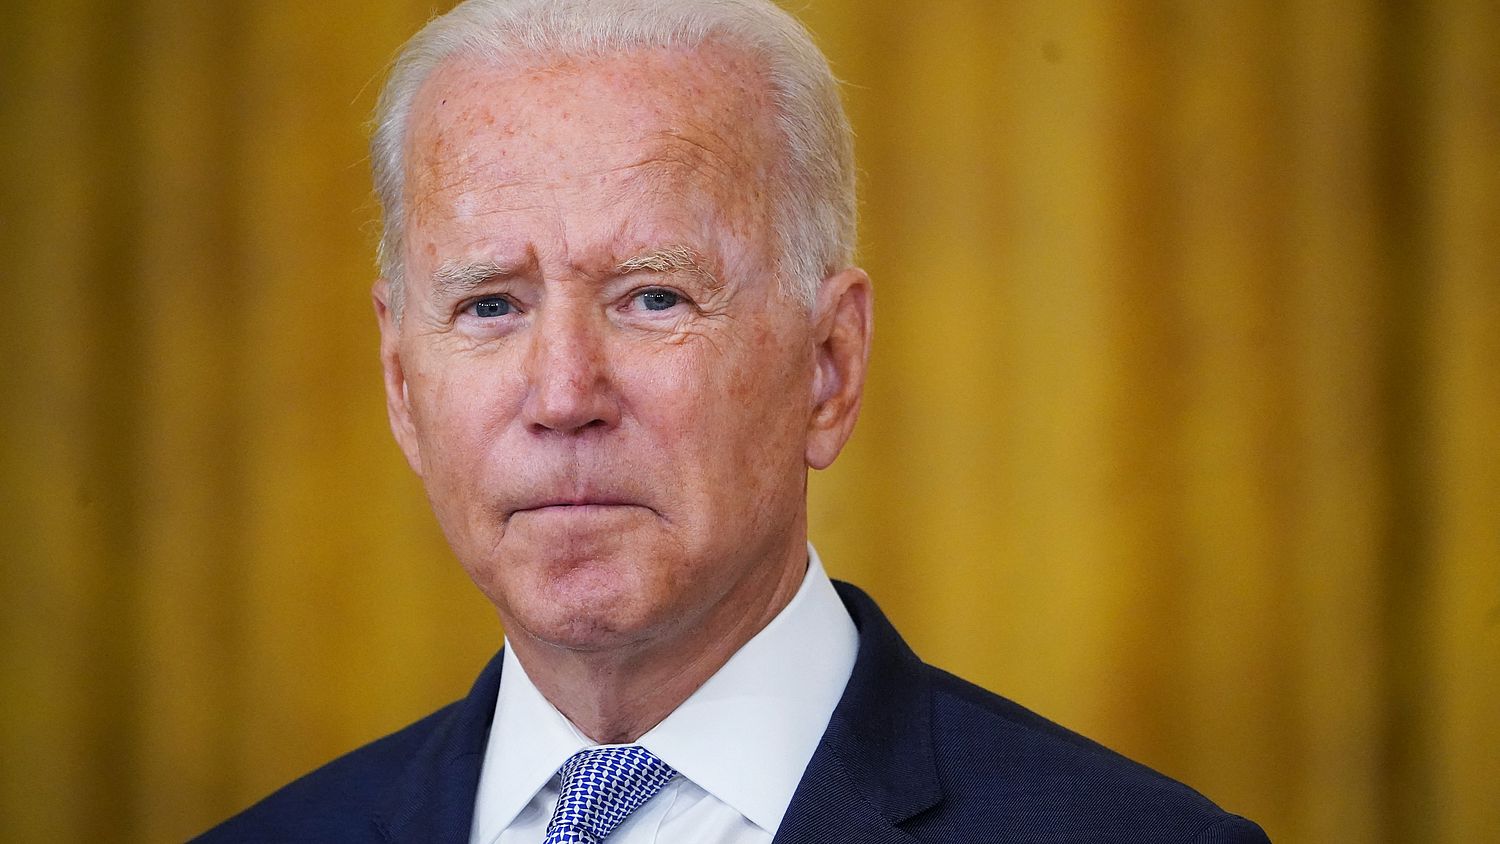 Biden wants to be the 'greenest' president, but he's asking for extra oil: that's how it is